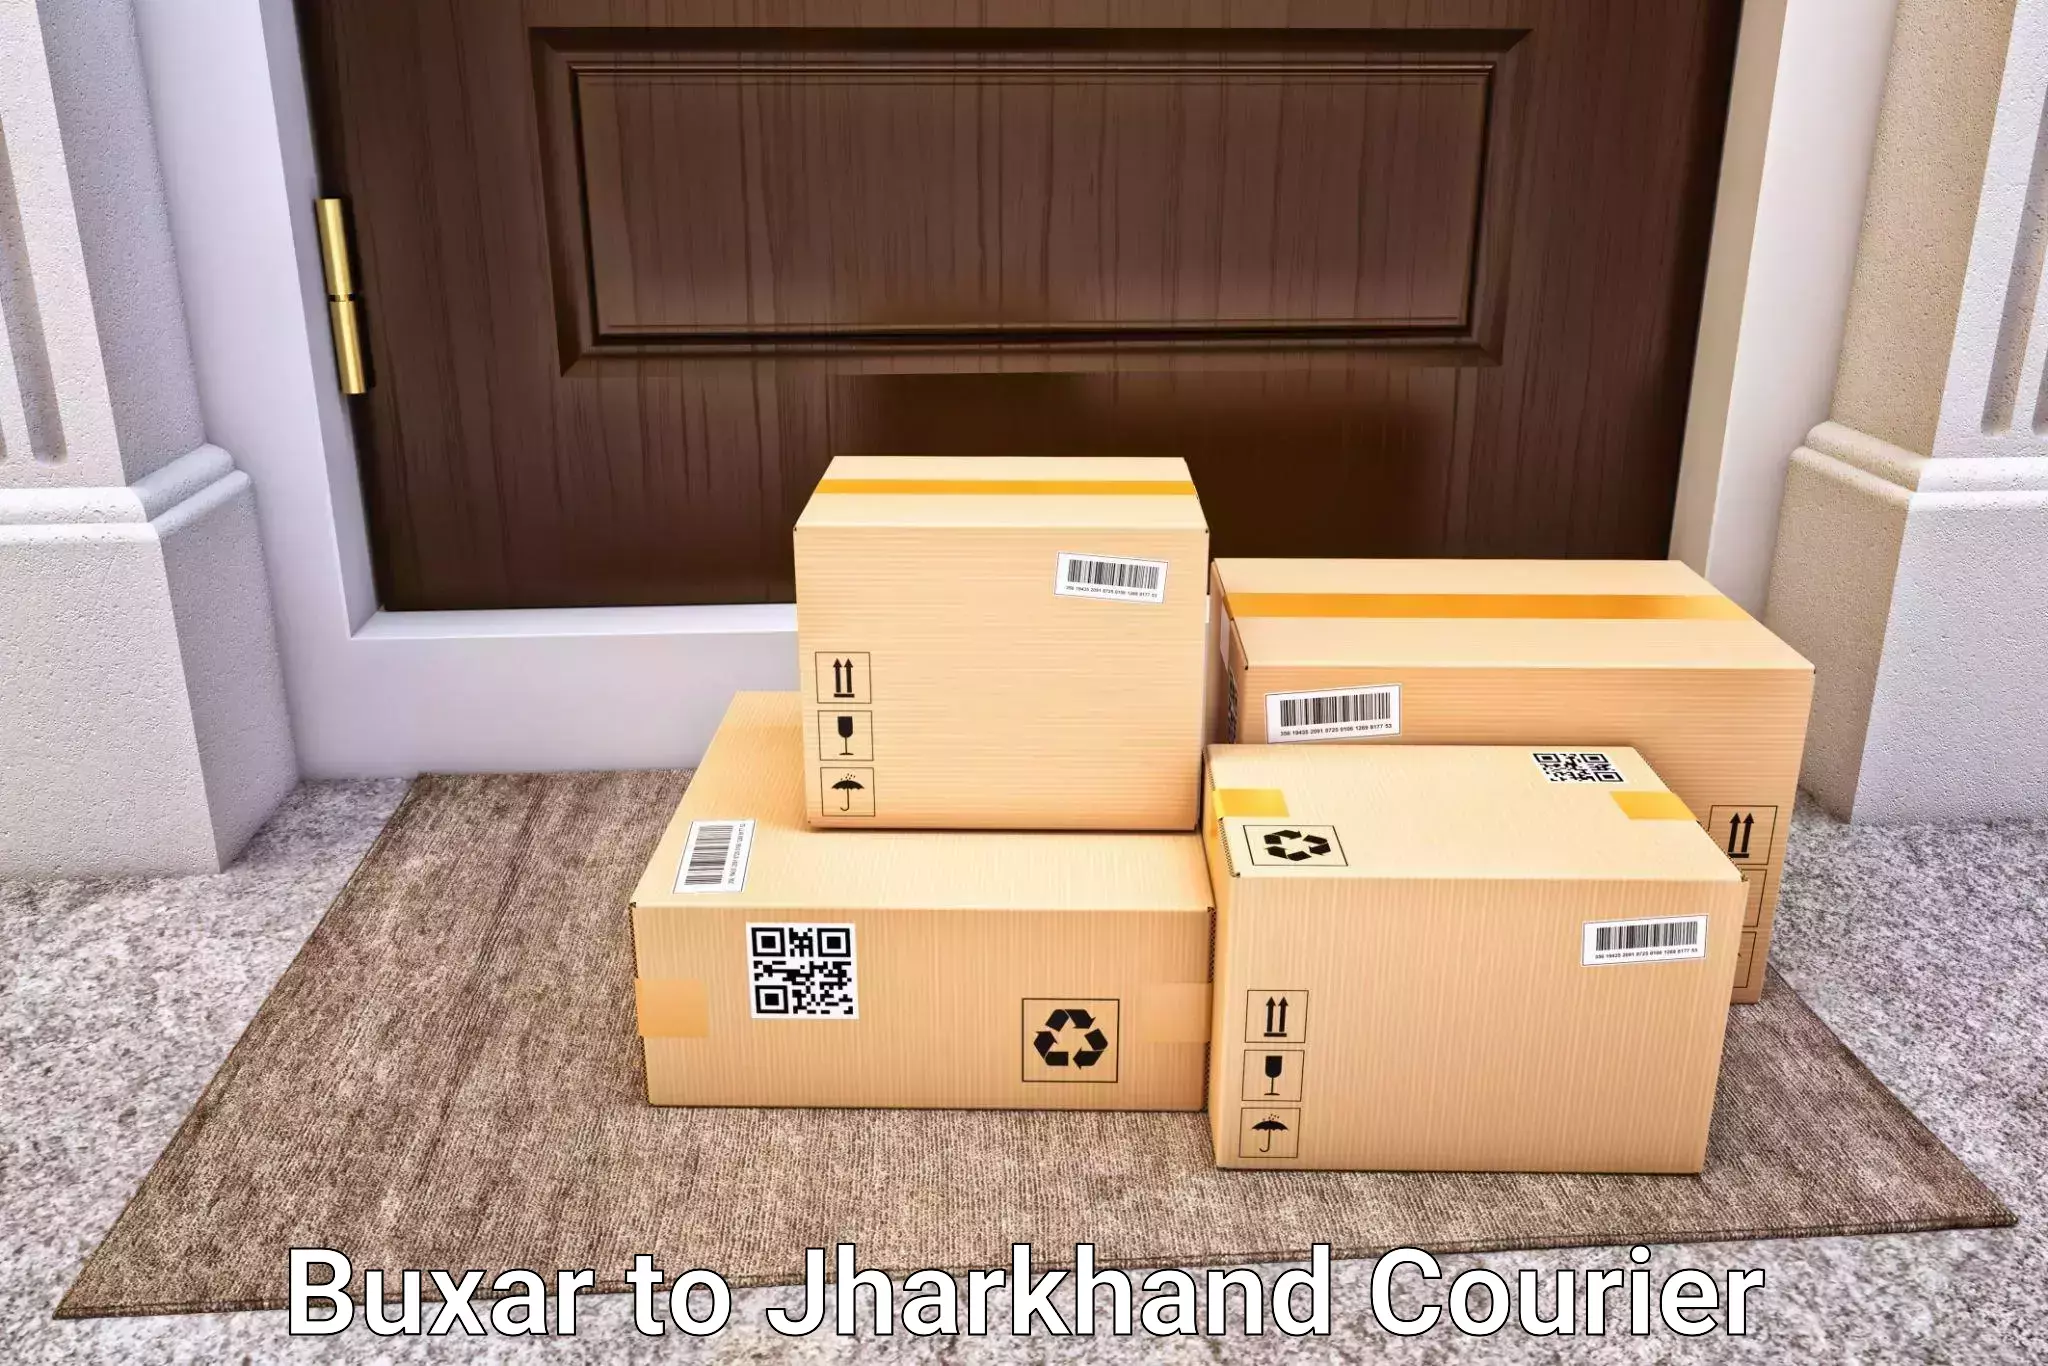 Hassle-free luggage shipping in Buxar to Manoharpur